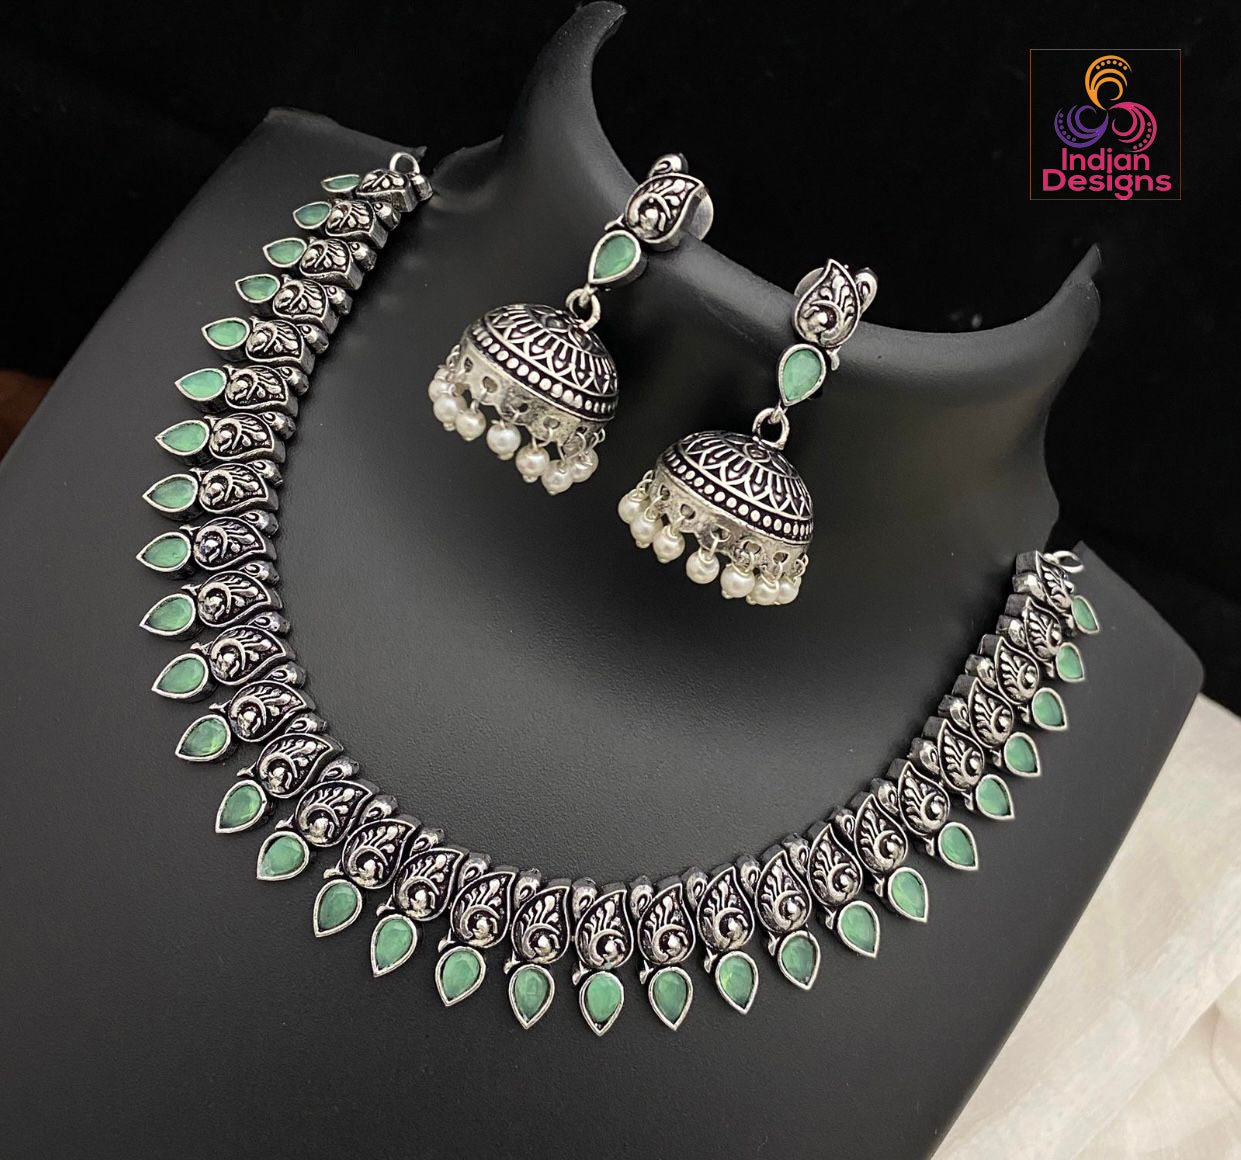 Antique Silver Polish Choker with Jhumka Earrings | Indian oxidized Silver choker necklace set